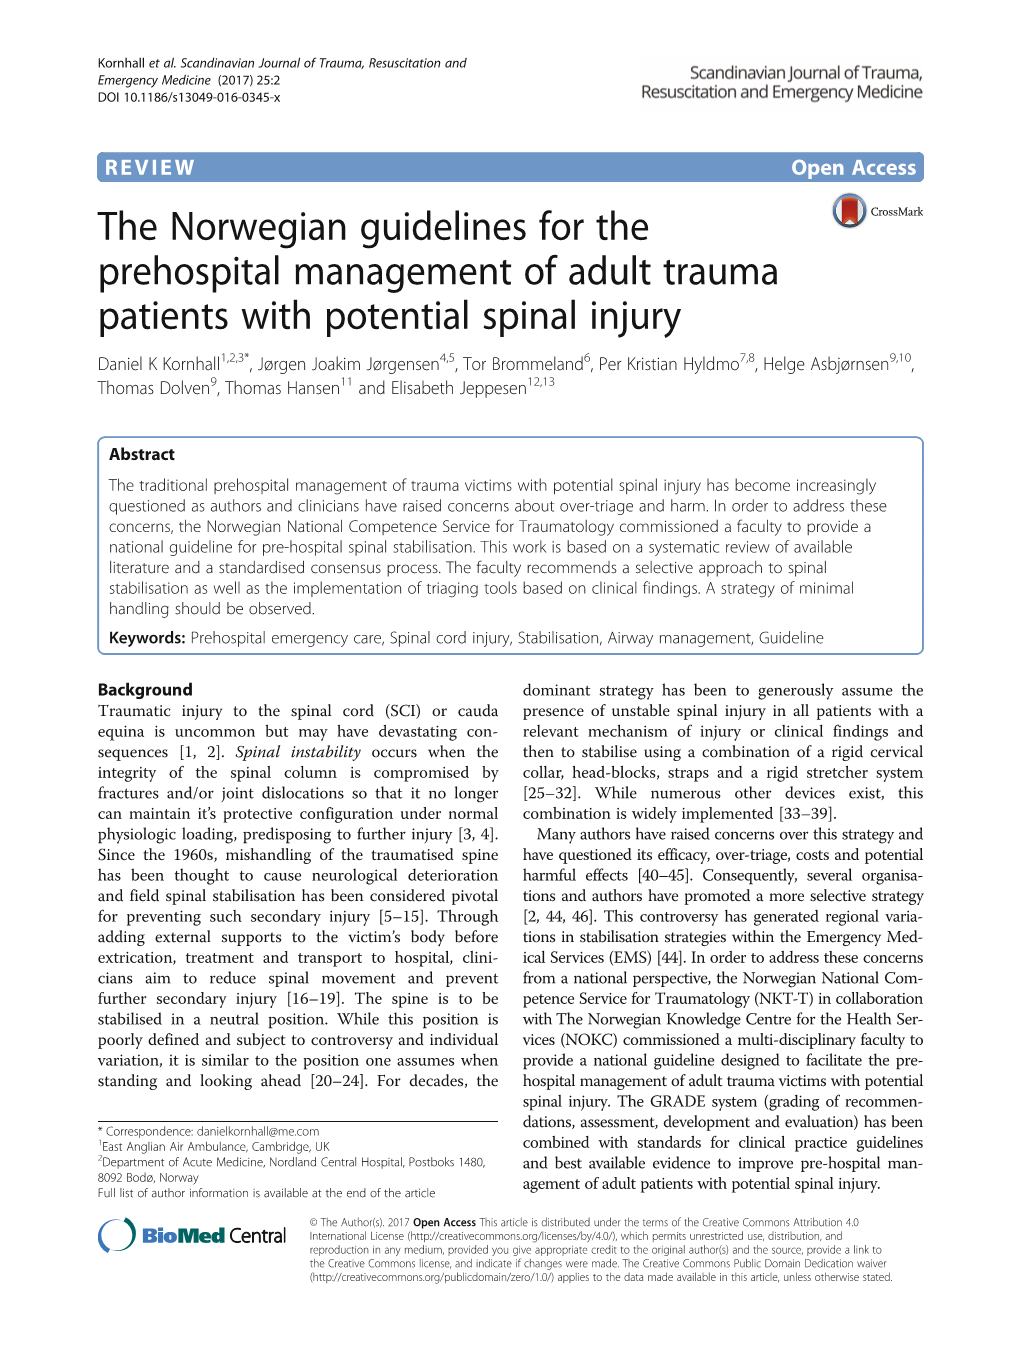 The Norwegian Guidelines for the Prehospital Management of Adult